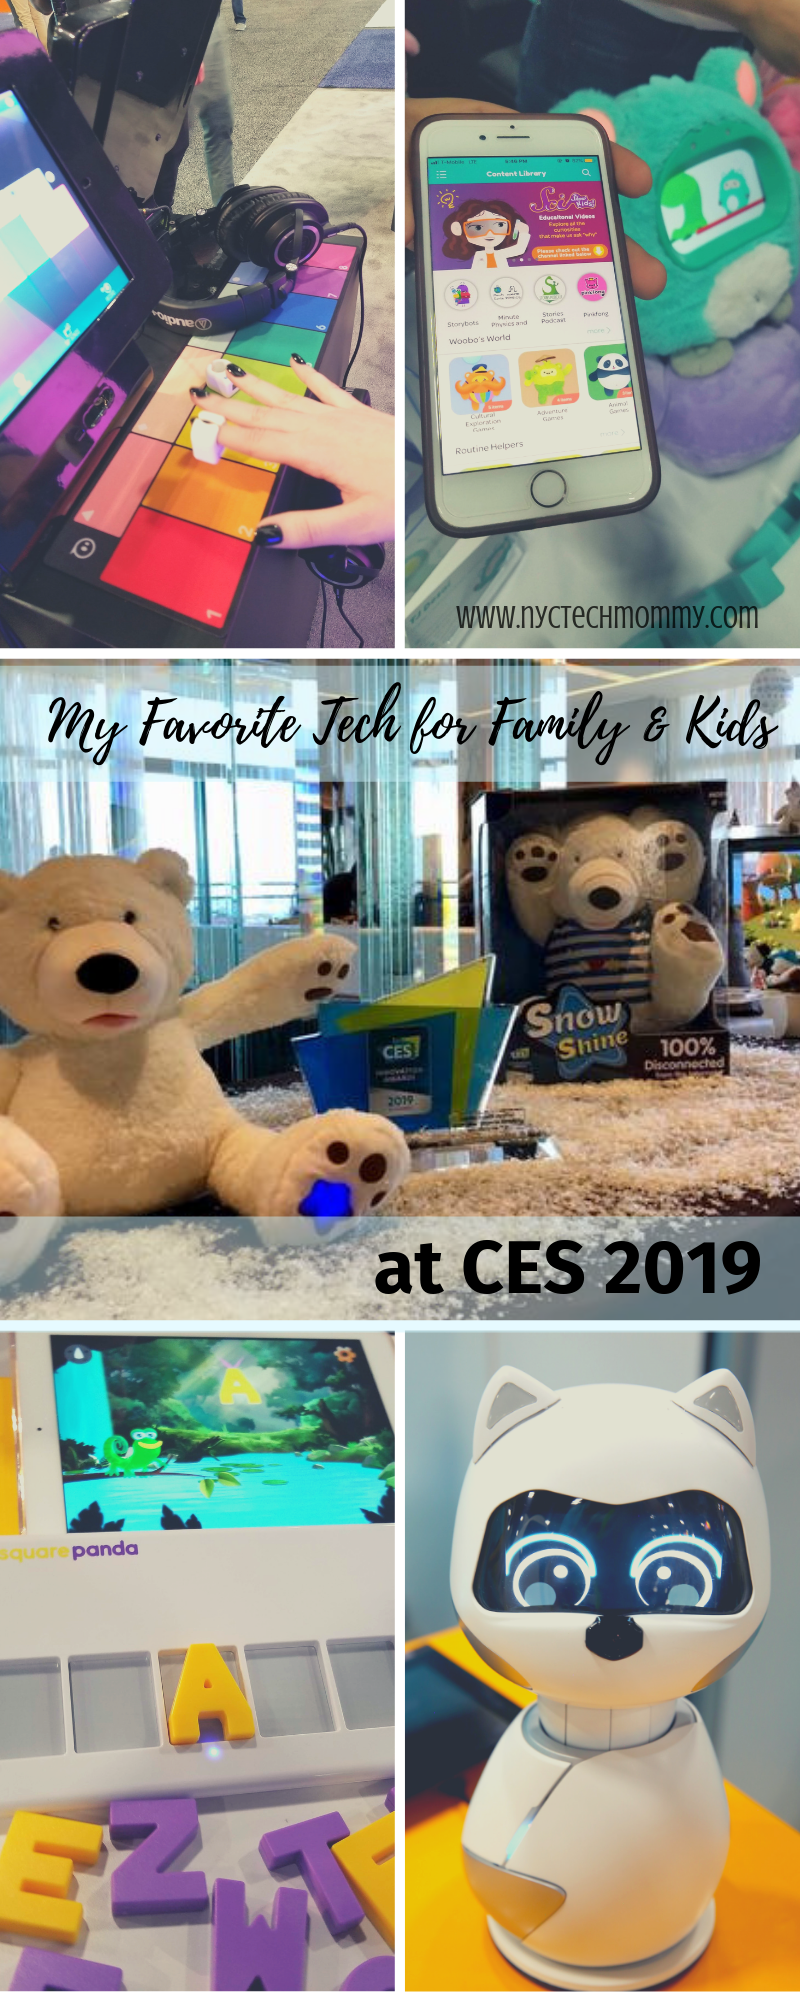 Tech for Family and Kids at CES 2019